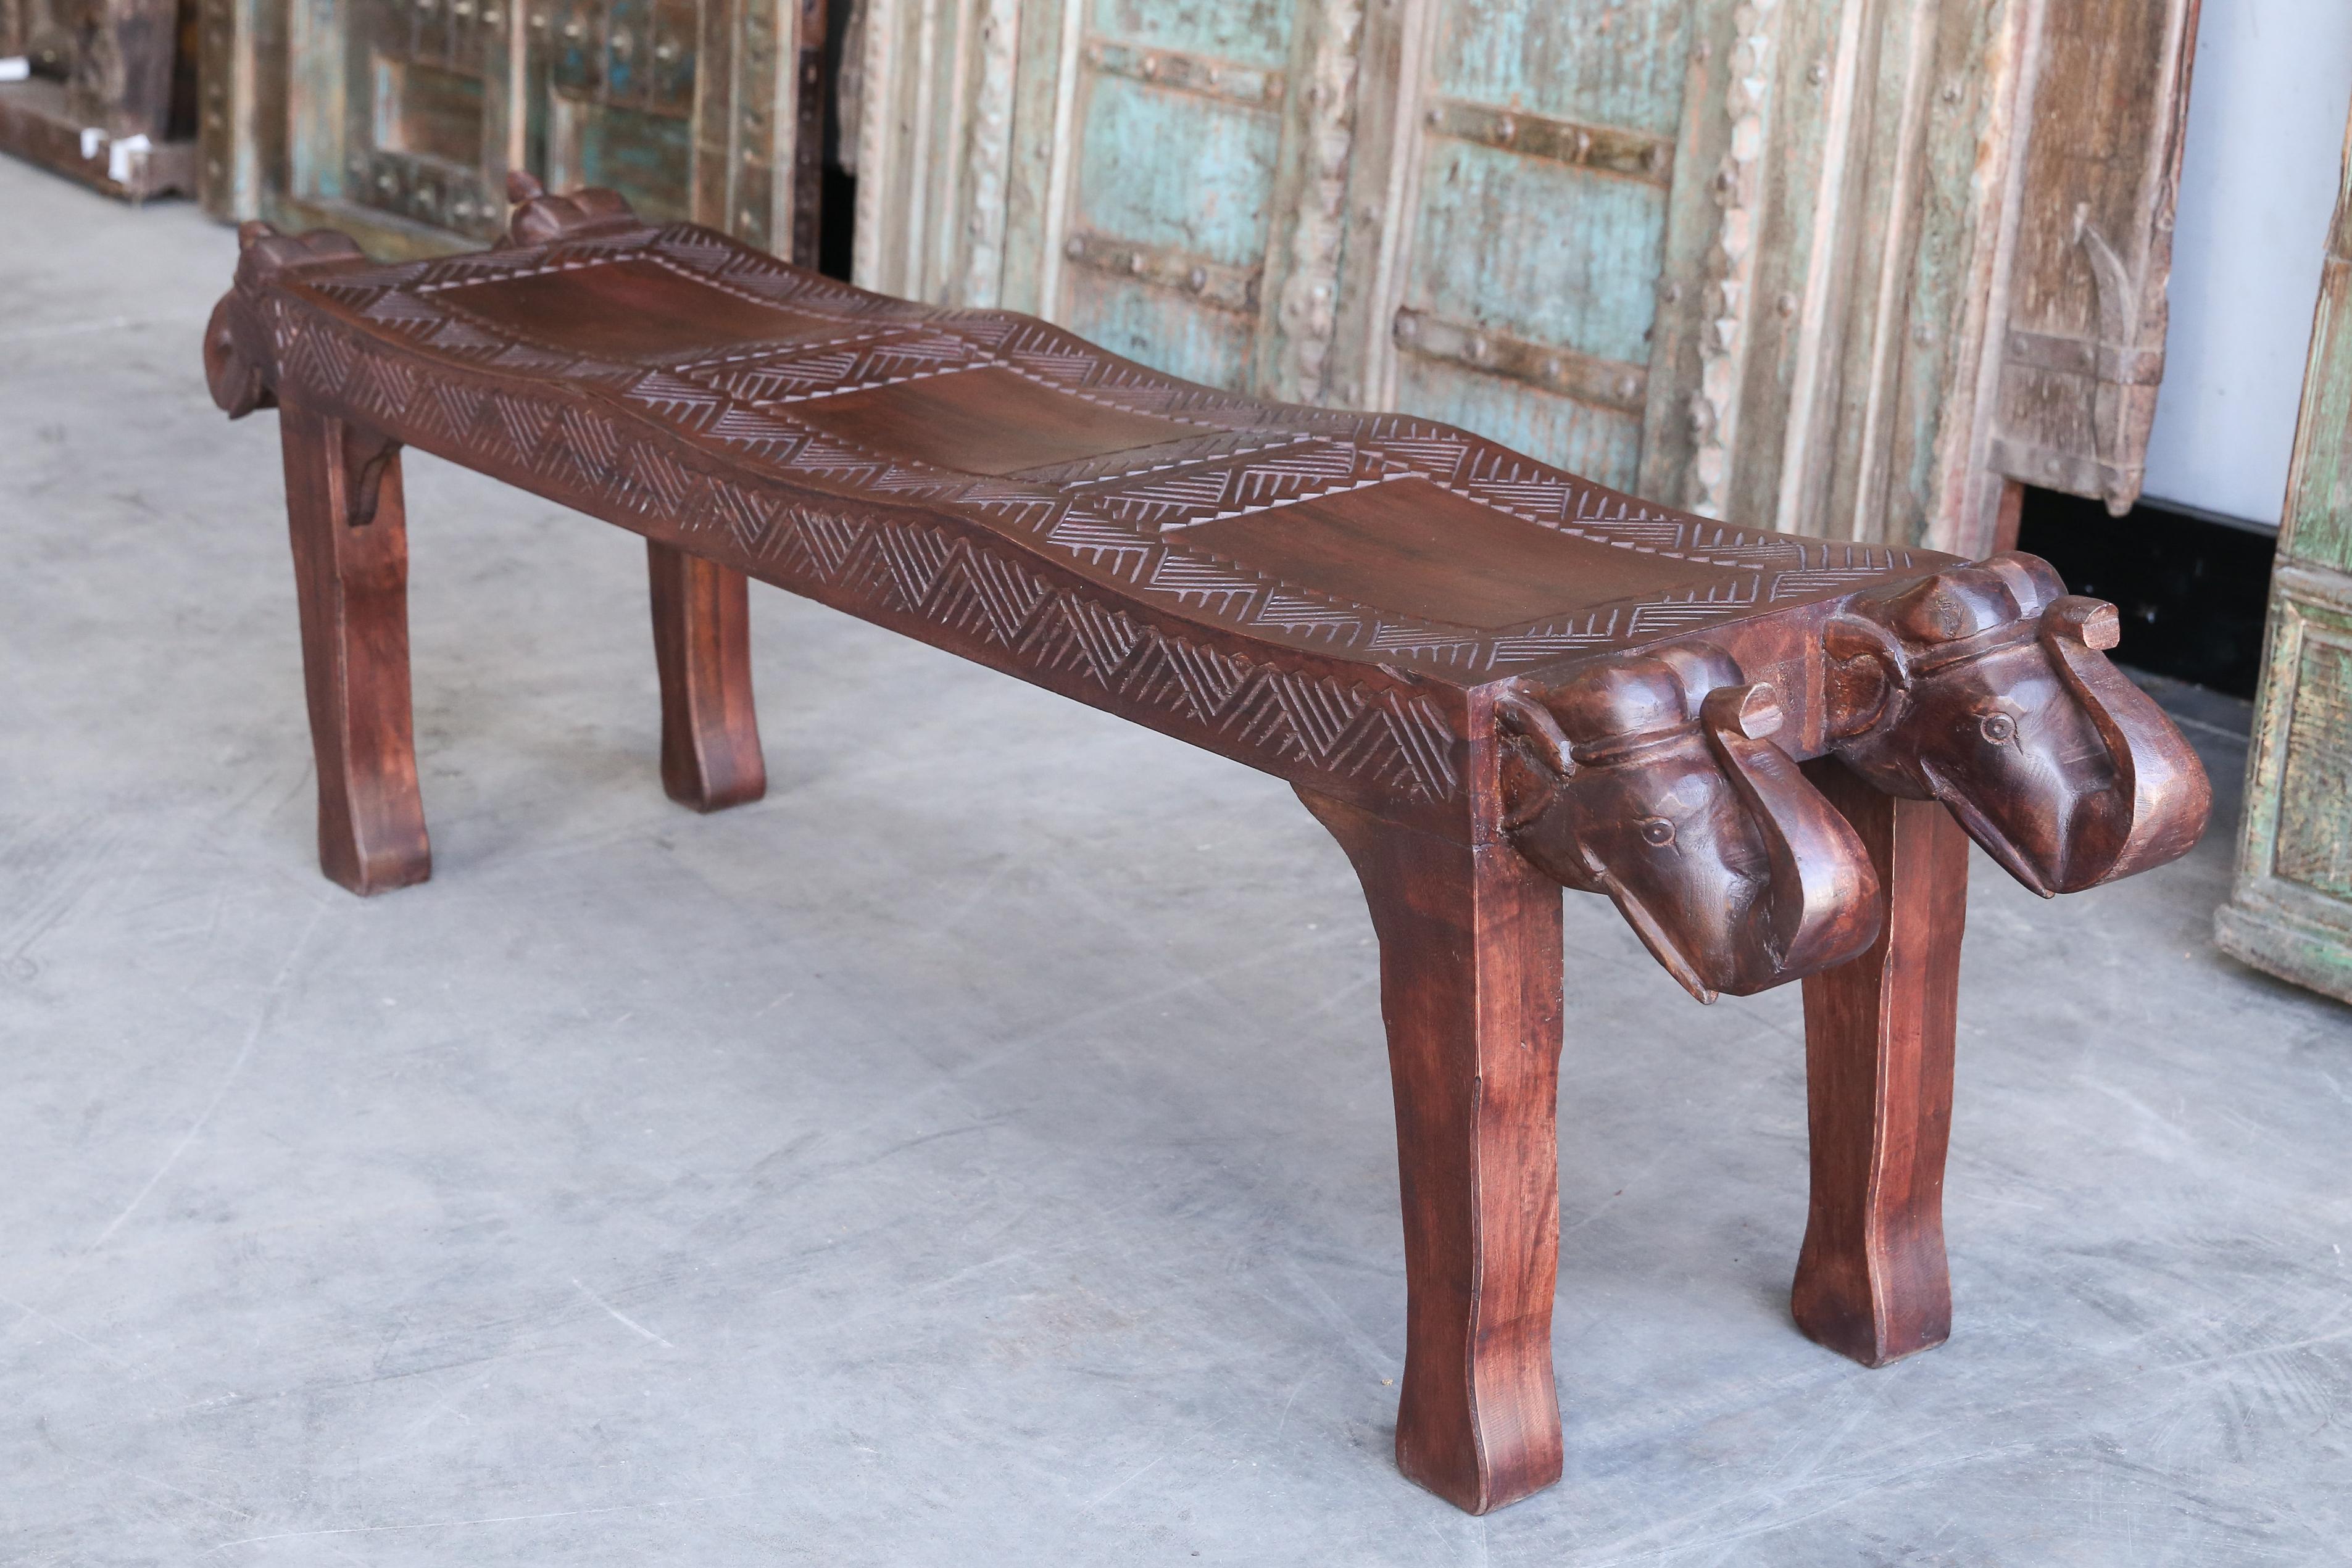 This is handcrafted in solid teak wood for a village headman. The seat is hand carved and is more than 3 inches thick all through. Heavily made to last centuries. Two carved elephant heads at both ends indicates the place is near jungles inhabited